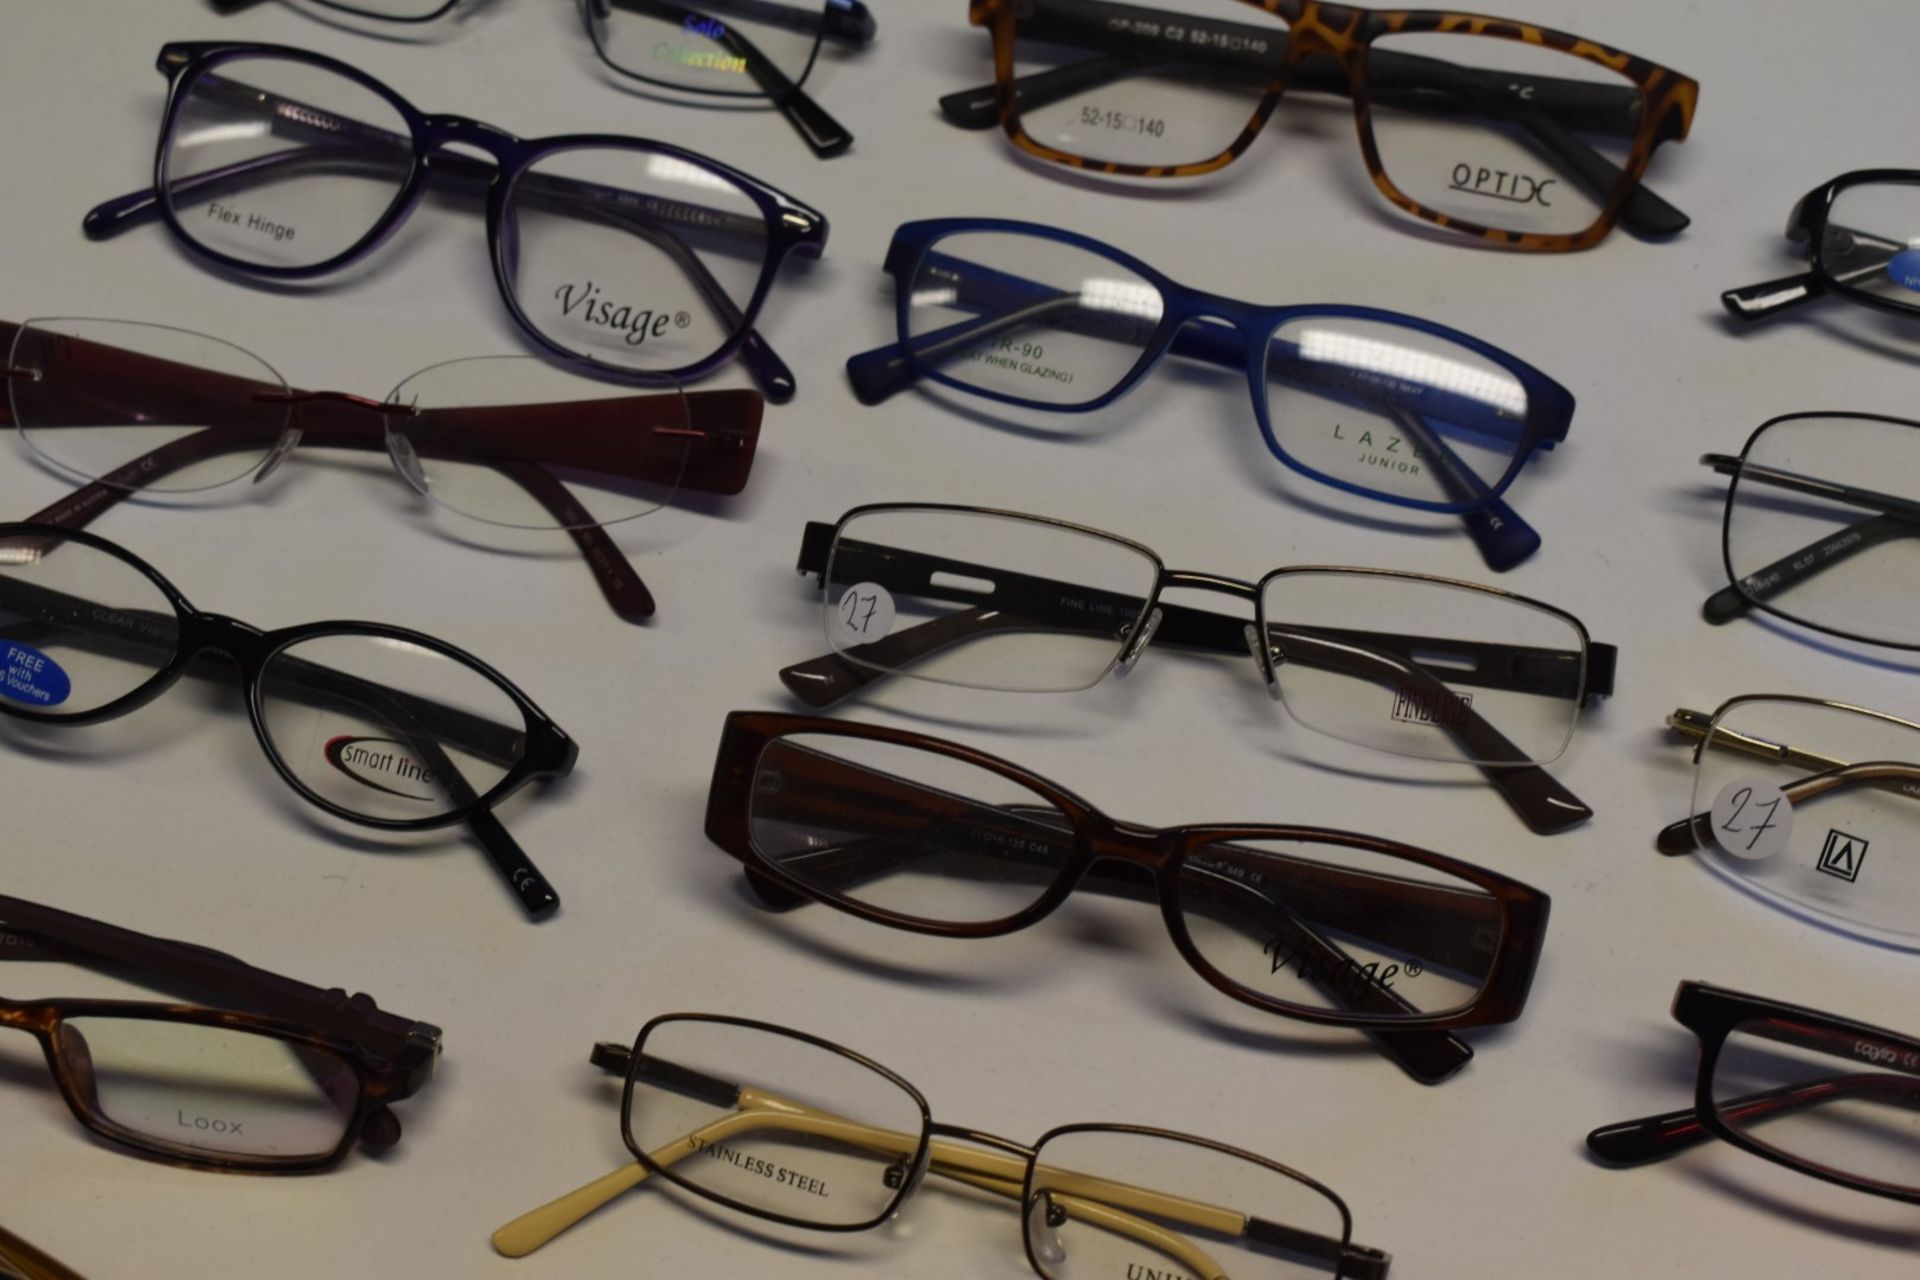 50 x Assorted Pairs of Spectacle Eye Glasses - New and Unused Stock - Various Designs and Brands - Image 15 of 15